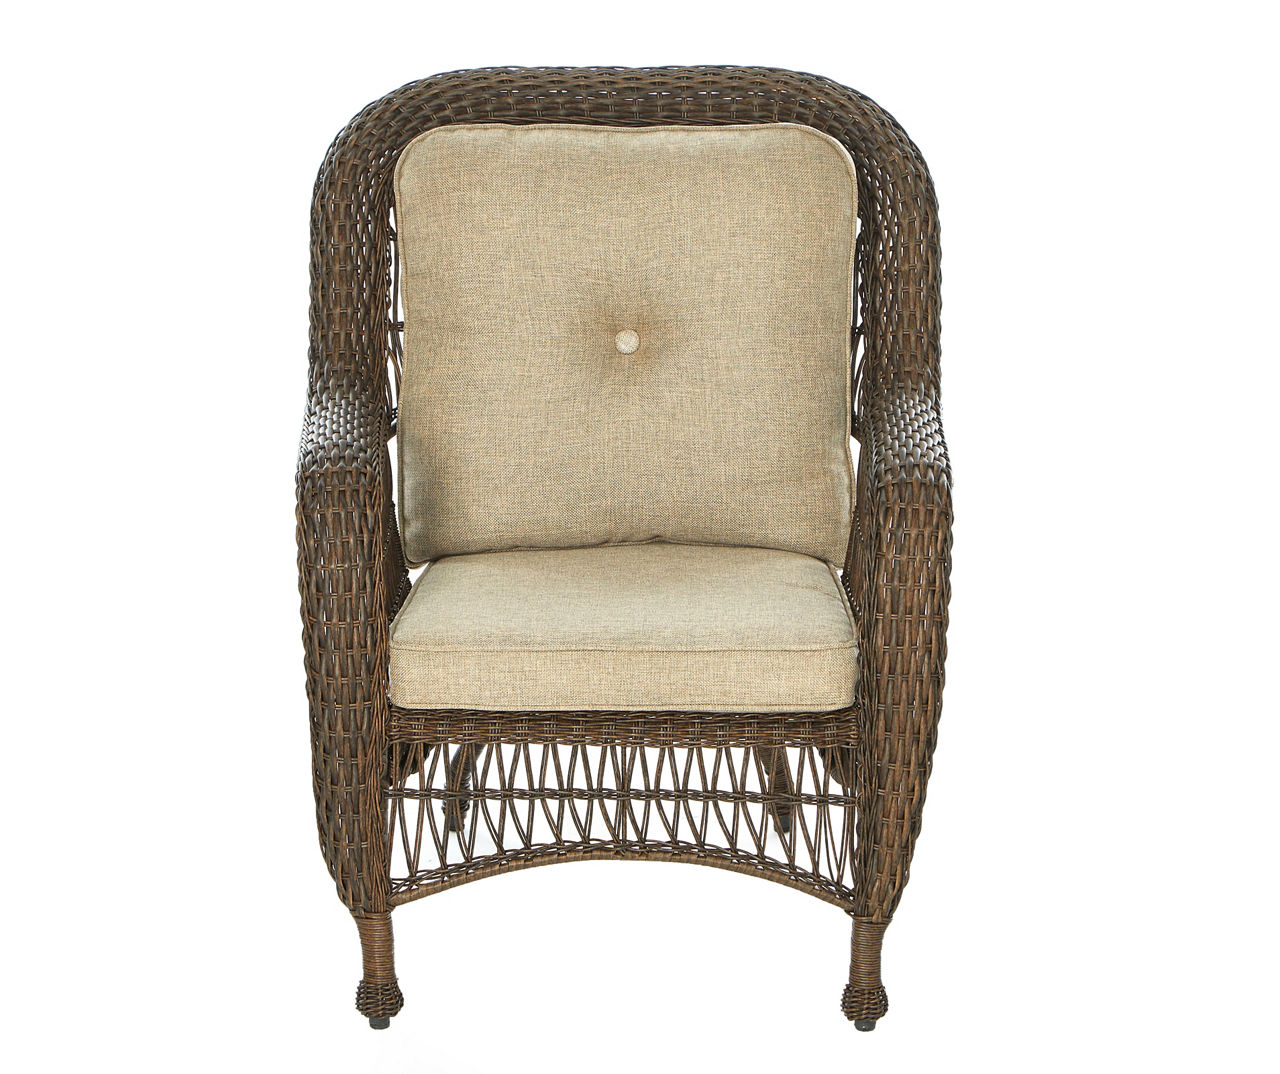 Real Harvest Run All-Weather Wicker Cushioned Patio Chair | Big Lots